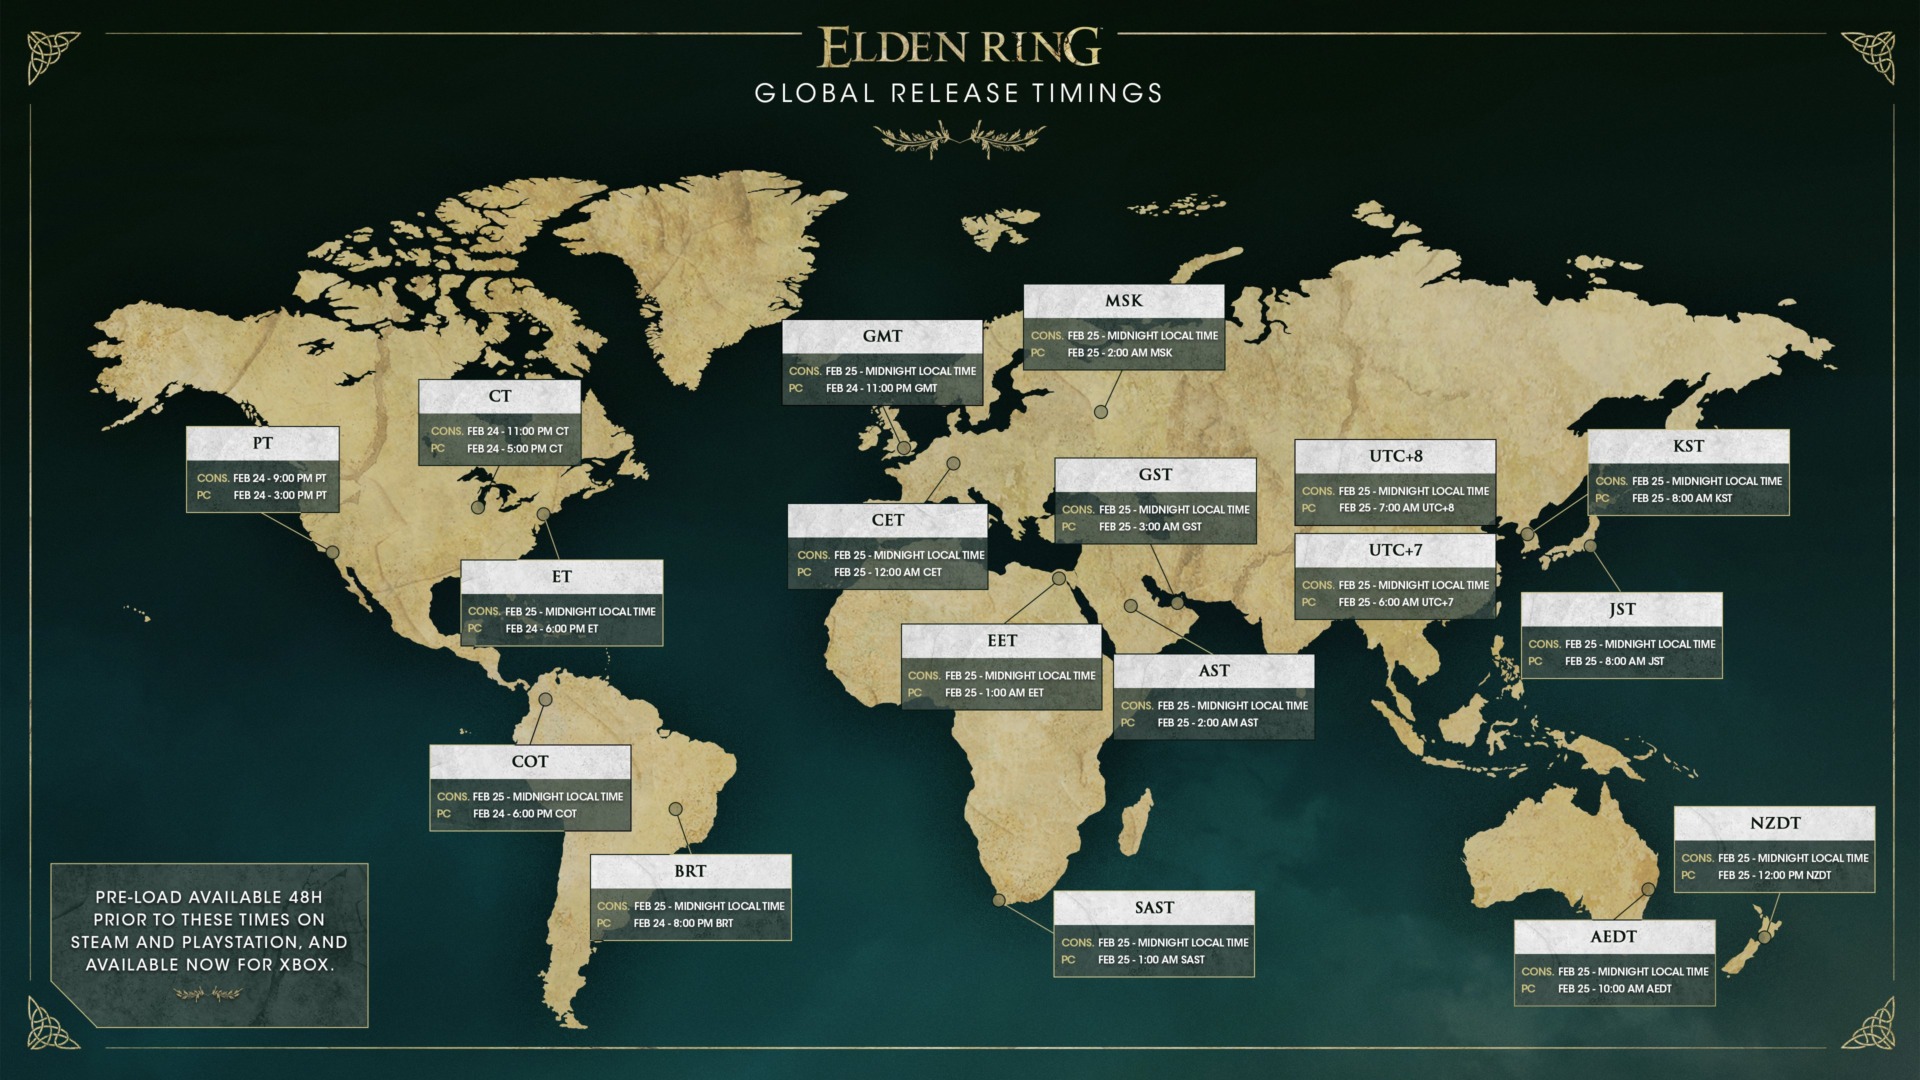 Elden Ring global release time shared ahead of release date